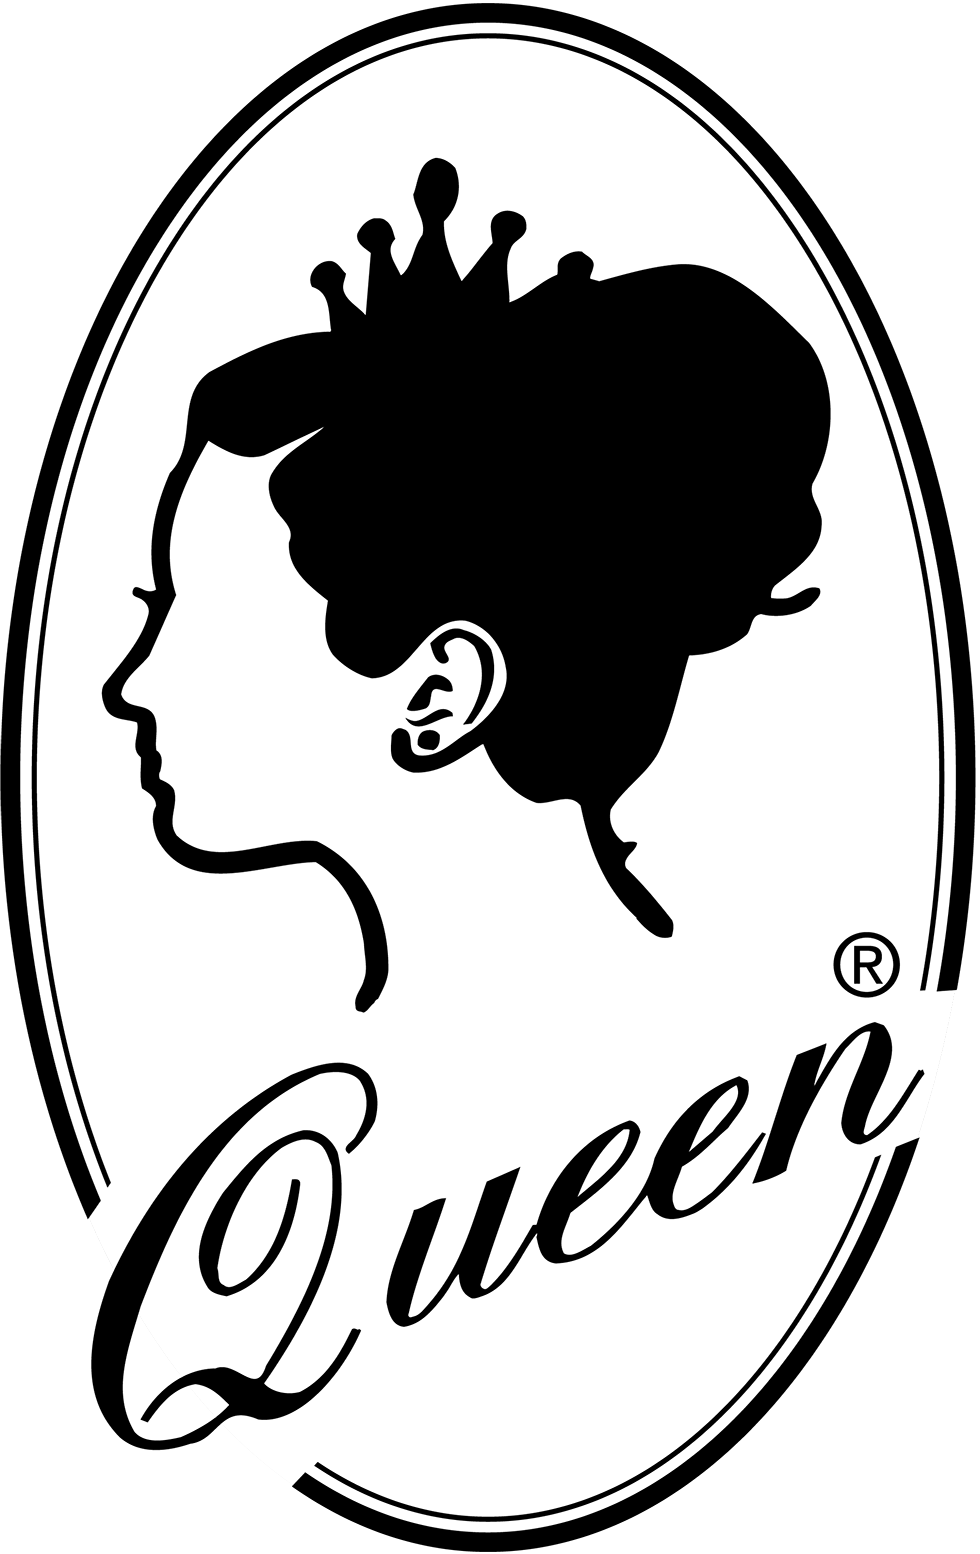 On Texas Hold 'em Poker Tables - Queen Logo Card (980x1554)